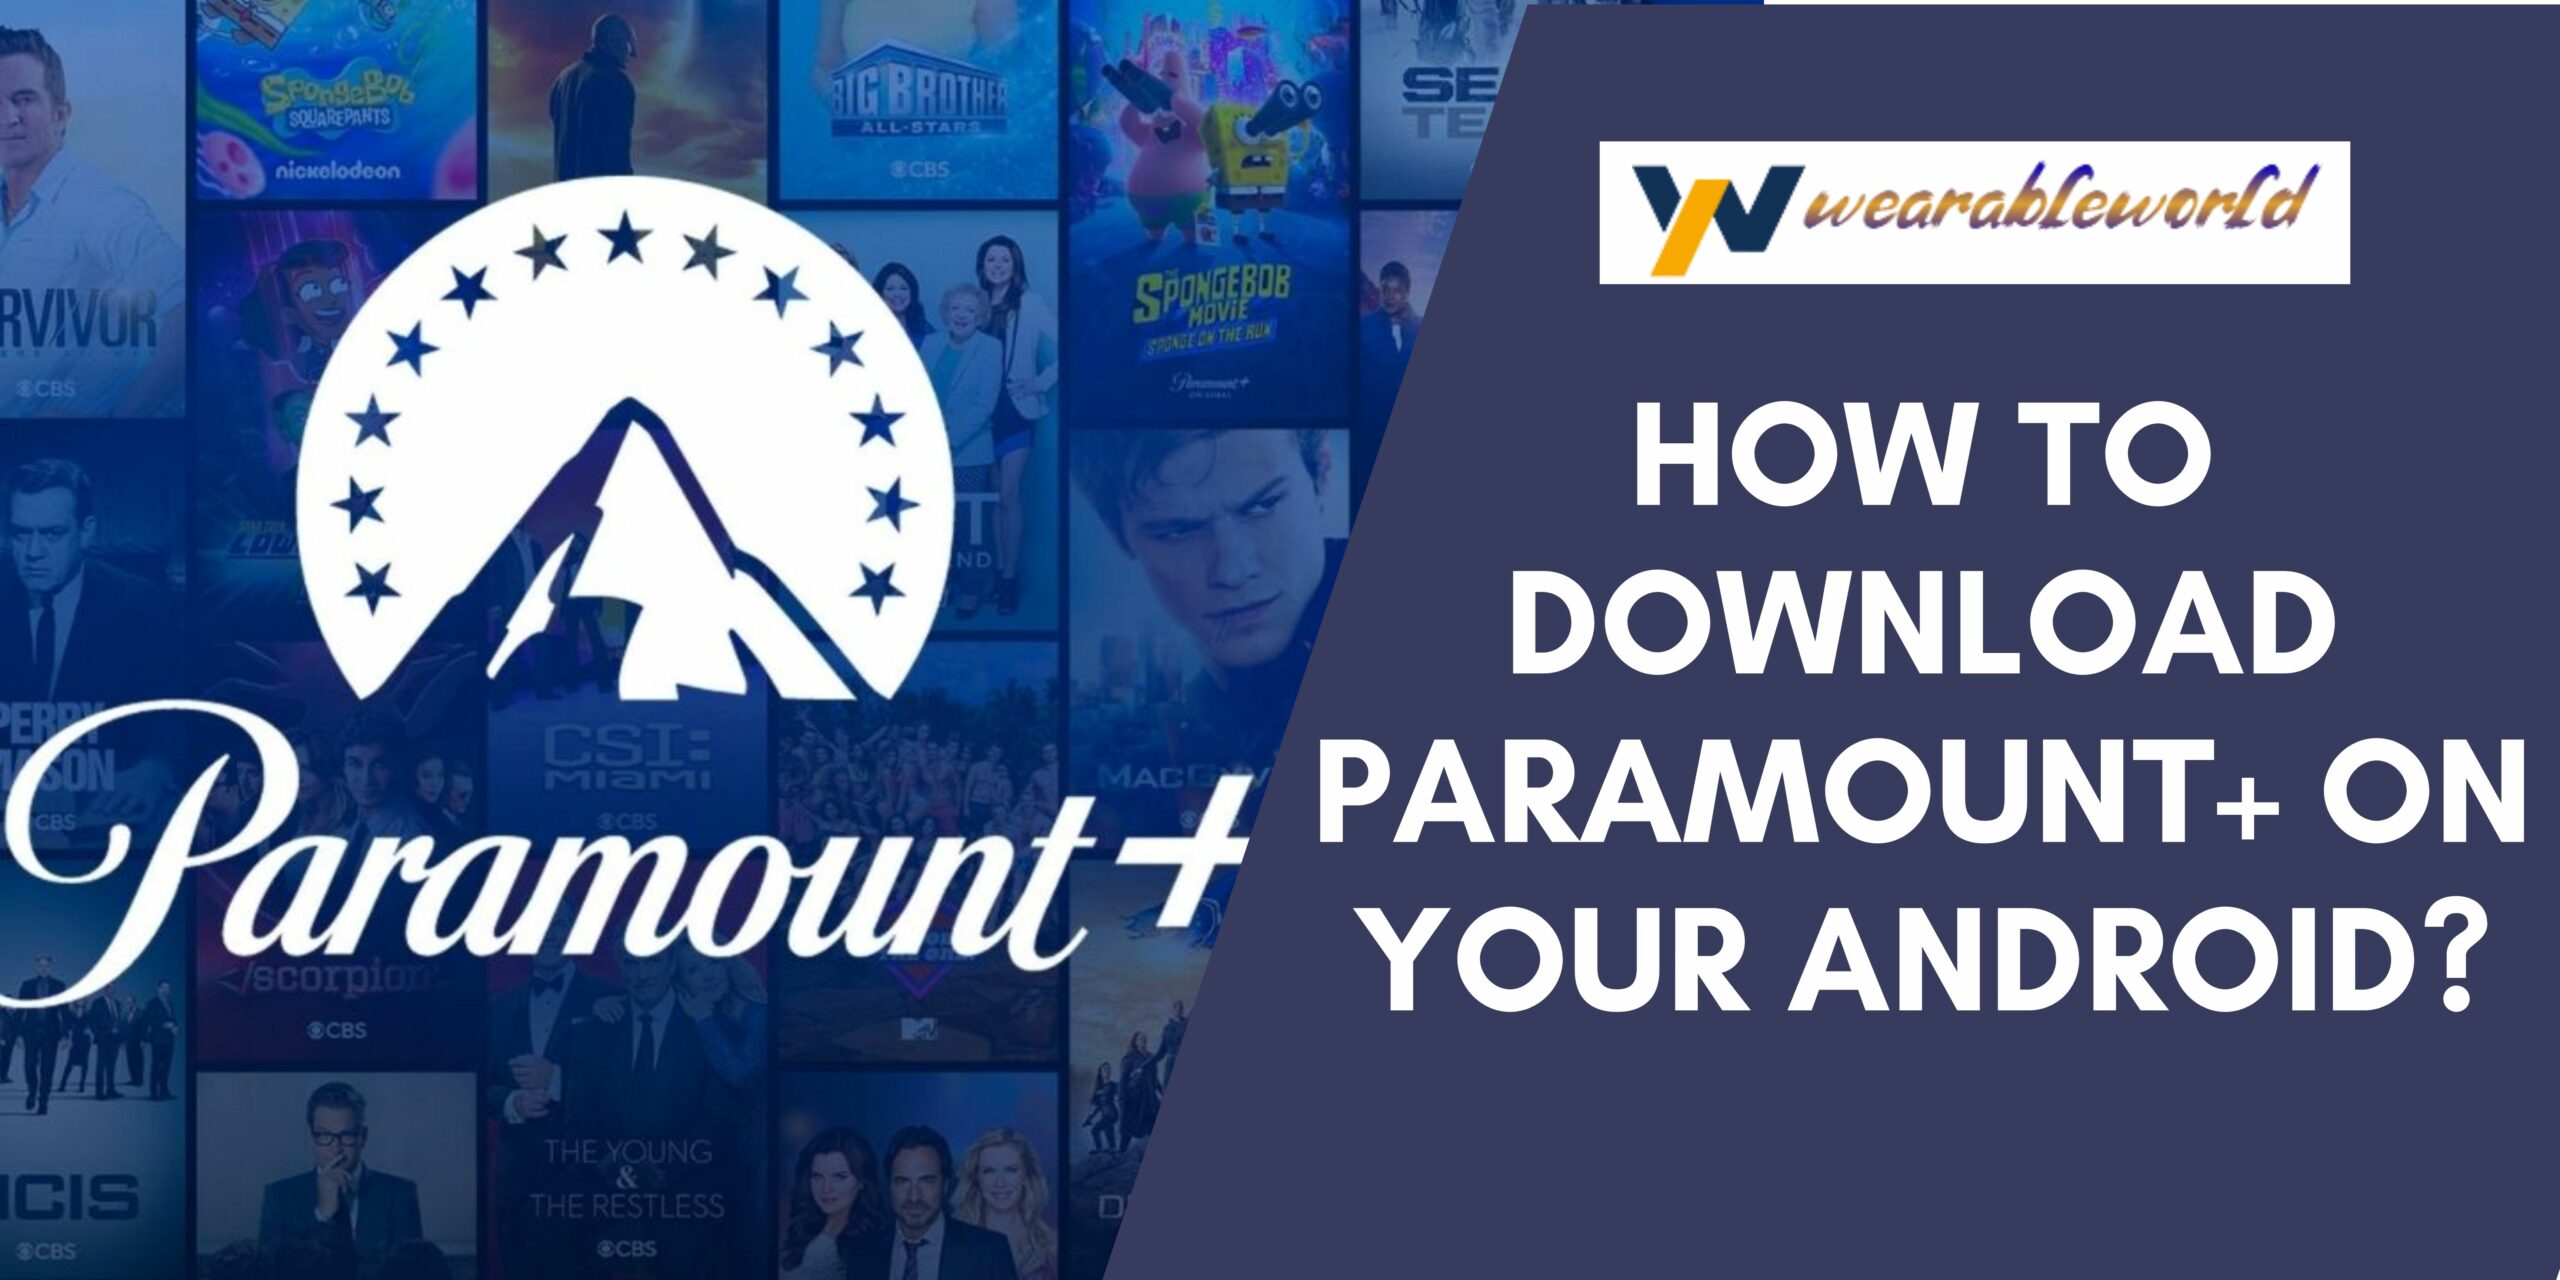 Download Paramount+ On Your Android